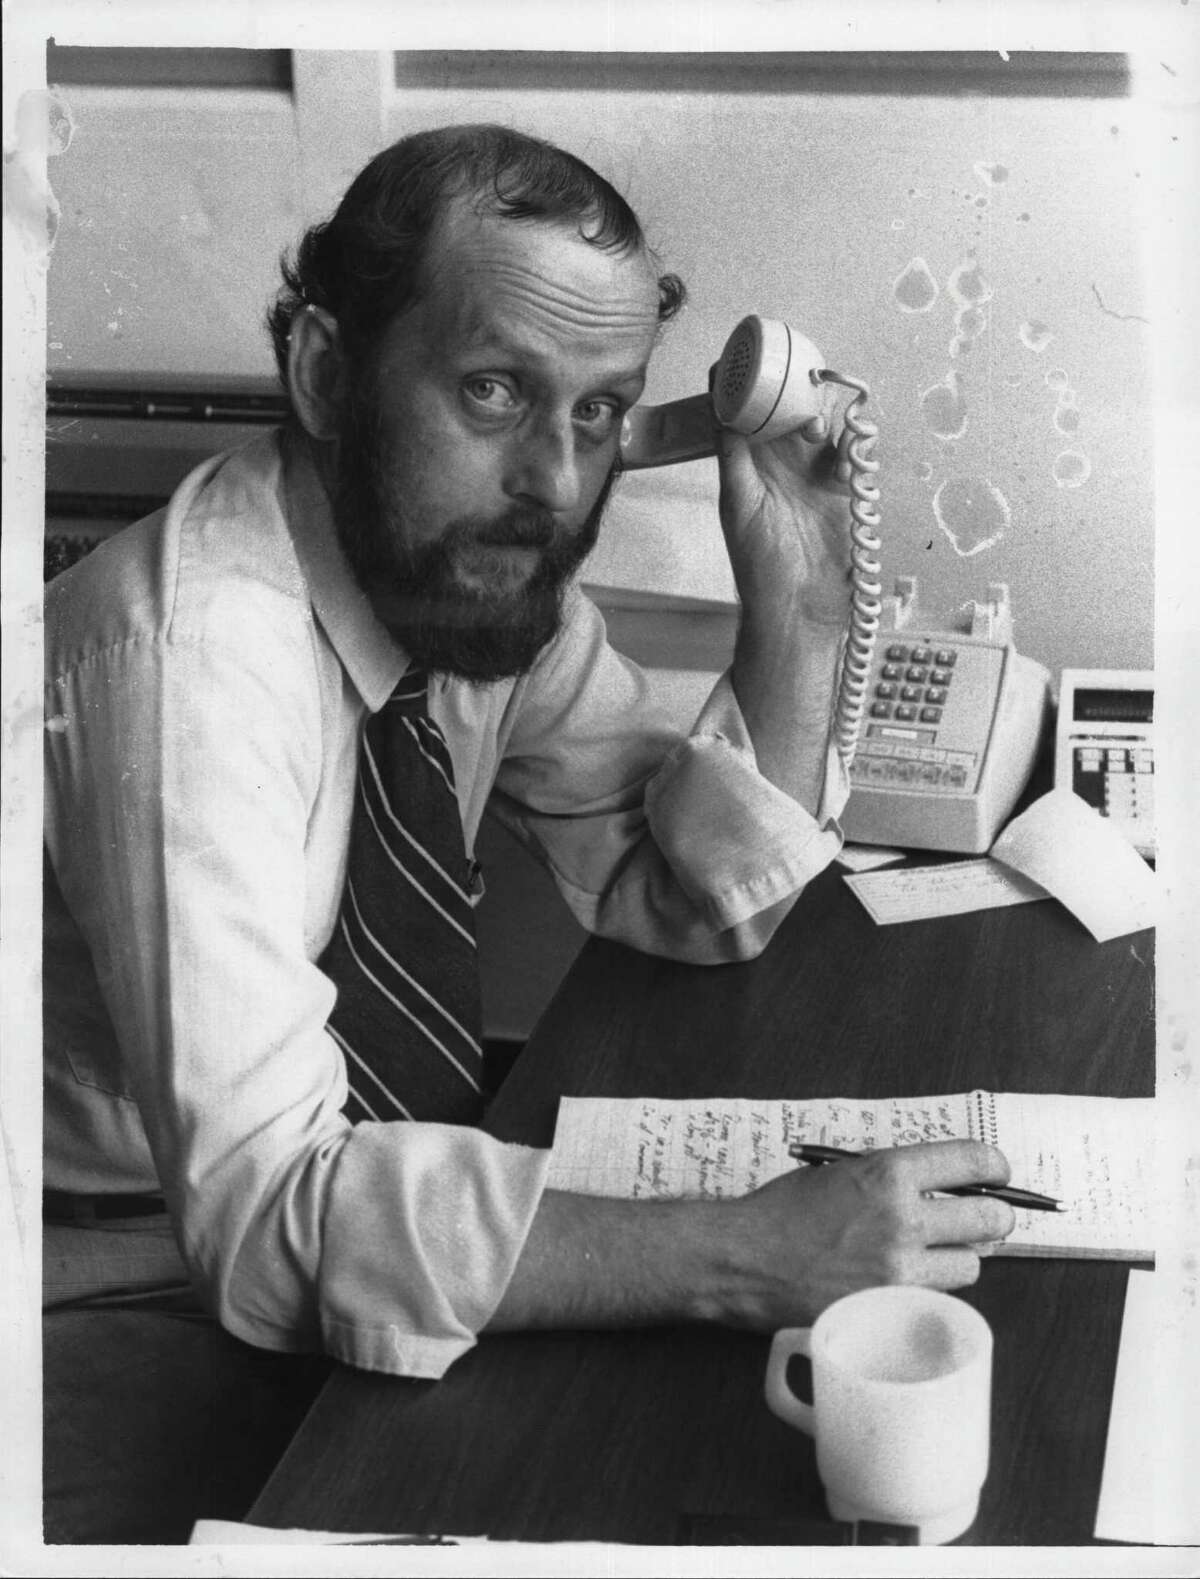 James Flateau, director of public relations, Corrections Dept., Building 2 state campus. August 1, 1984 (Paul Kniskern/Times Union Archive)